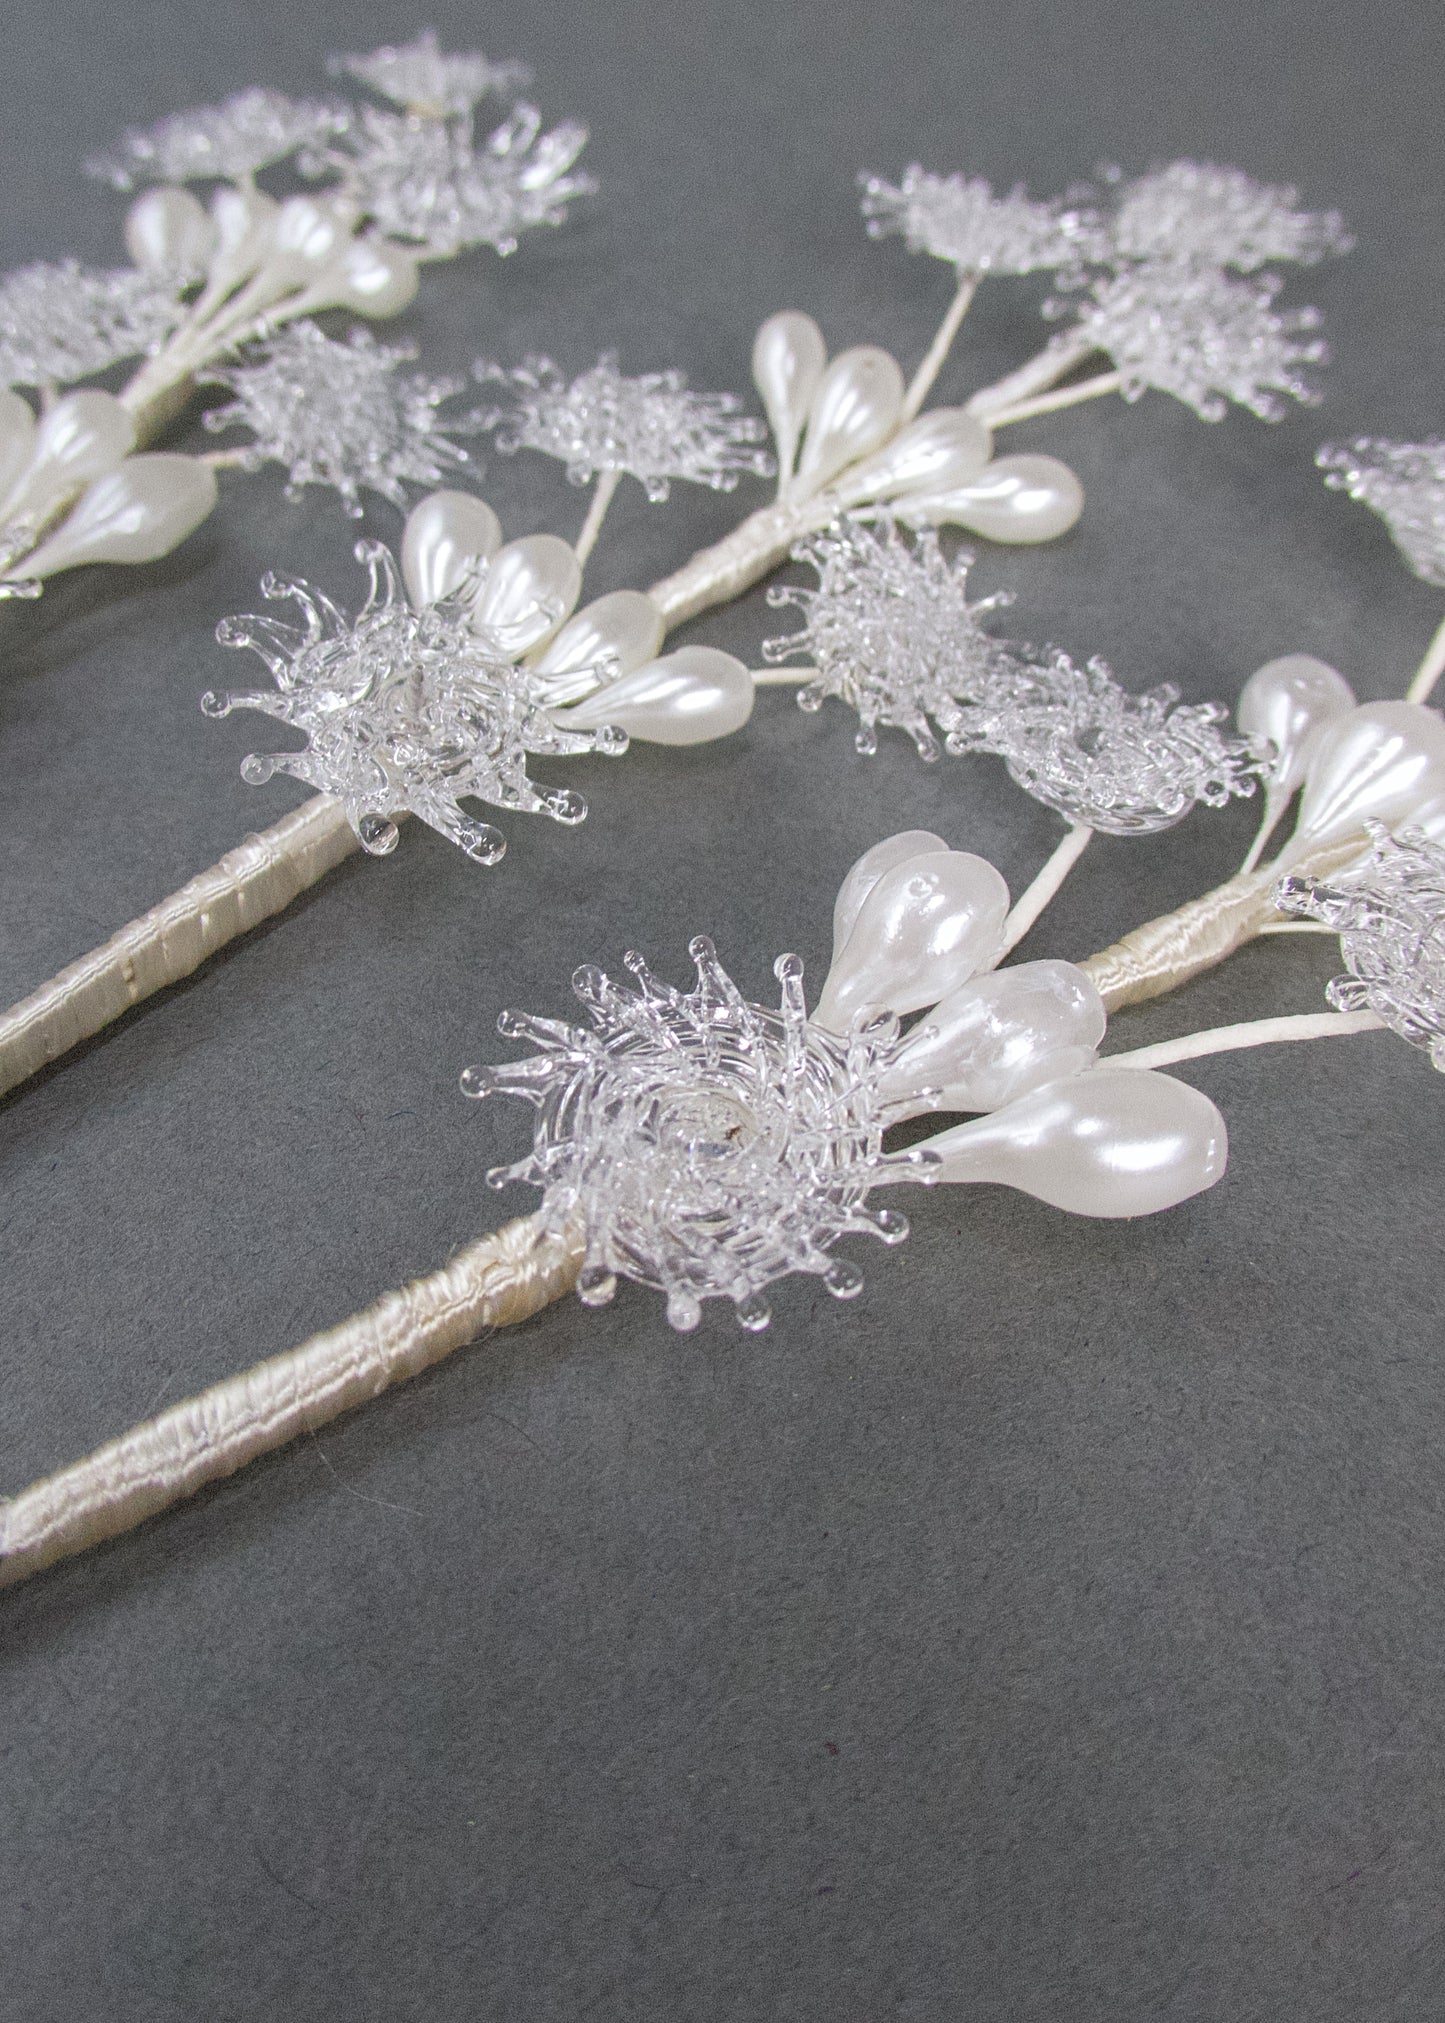 Soft Ivory Wax Bead Stem with Crystal Floral Bursts